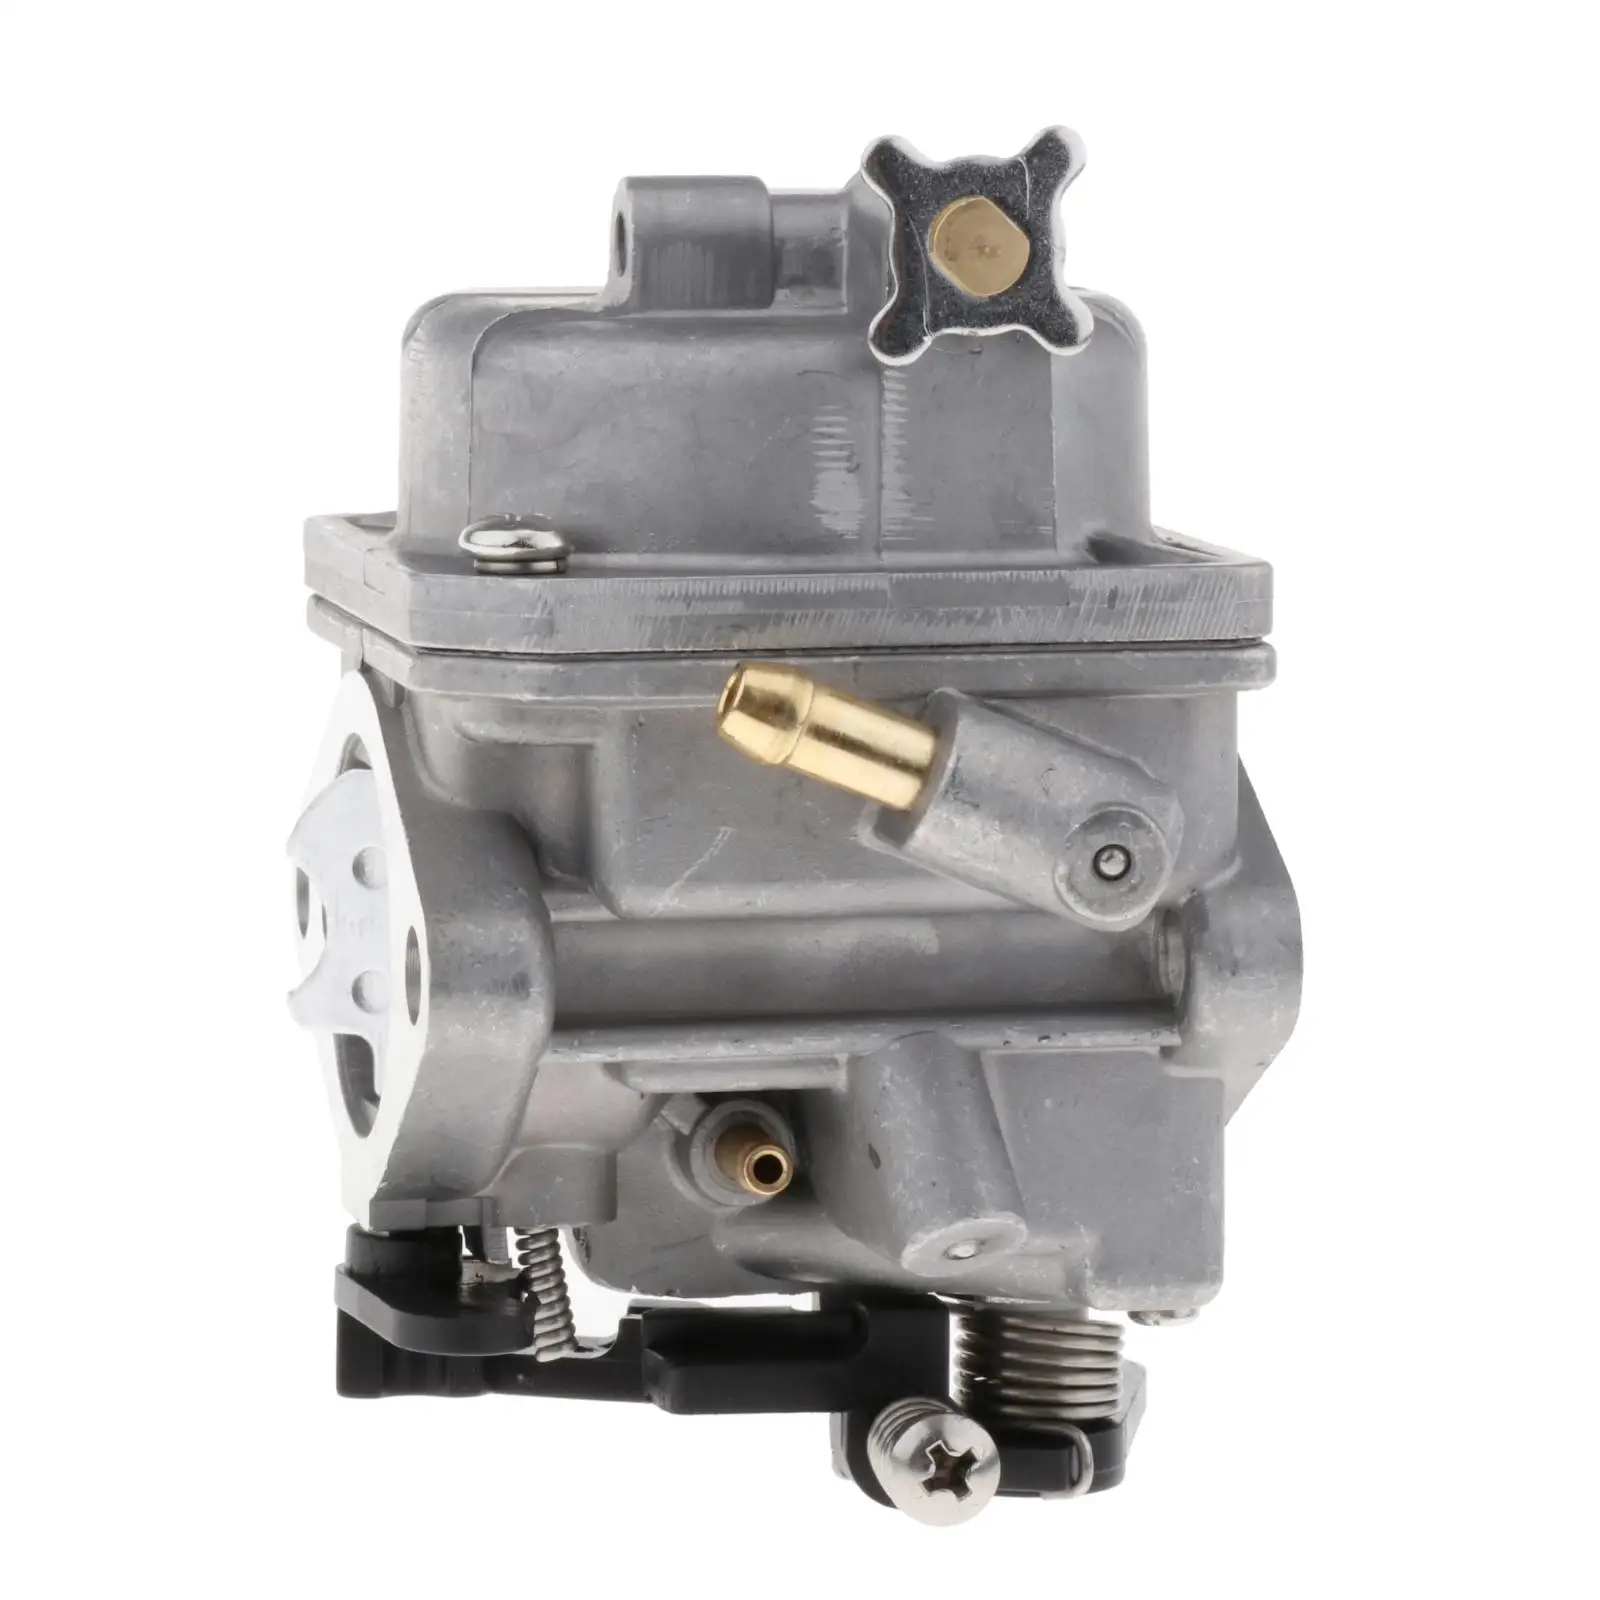 16100-ZV1-A00 16100-ZV1-A03 Carburetor Carb Assy for Honda Outboard BC05B BF 5 HP 4 Stroke